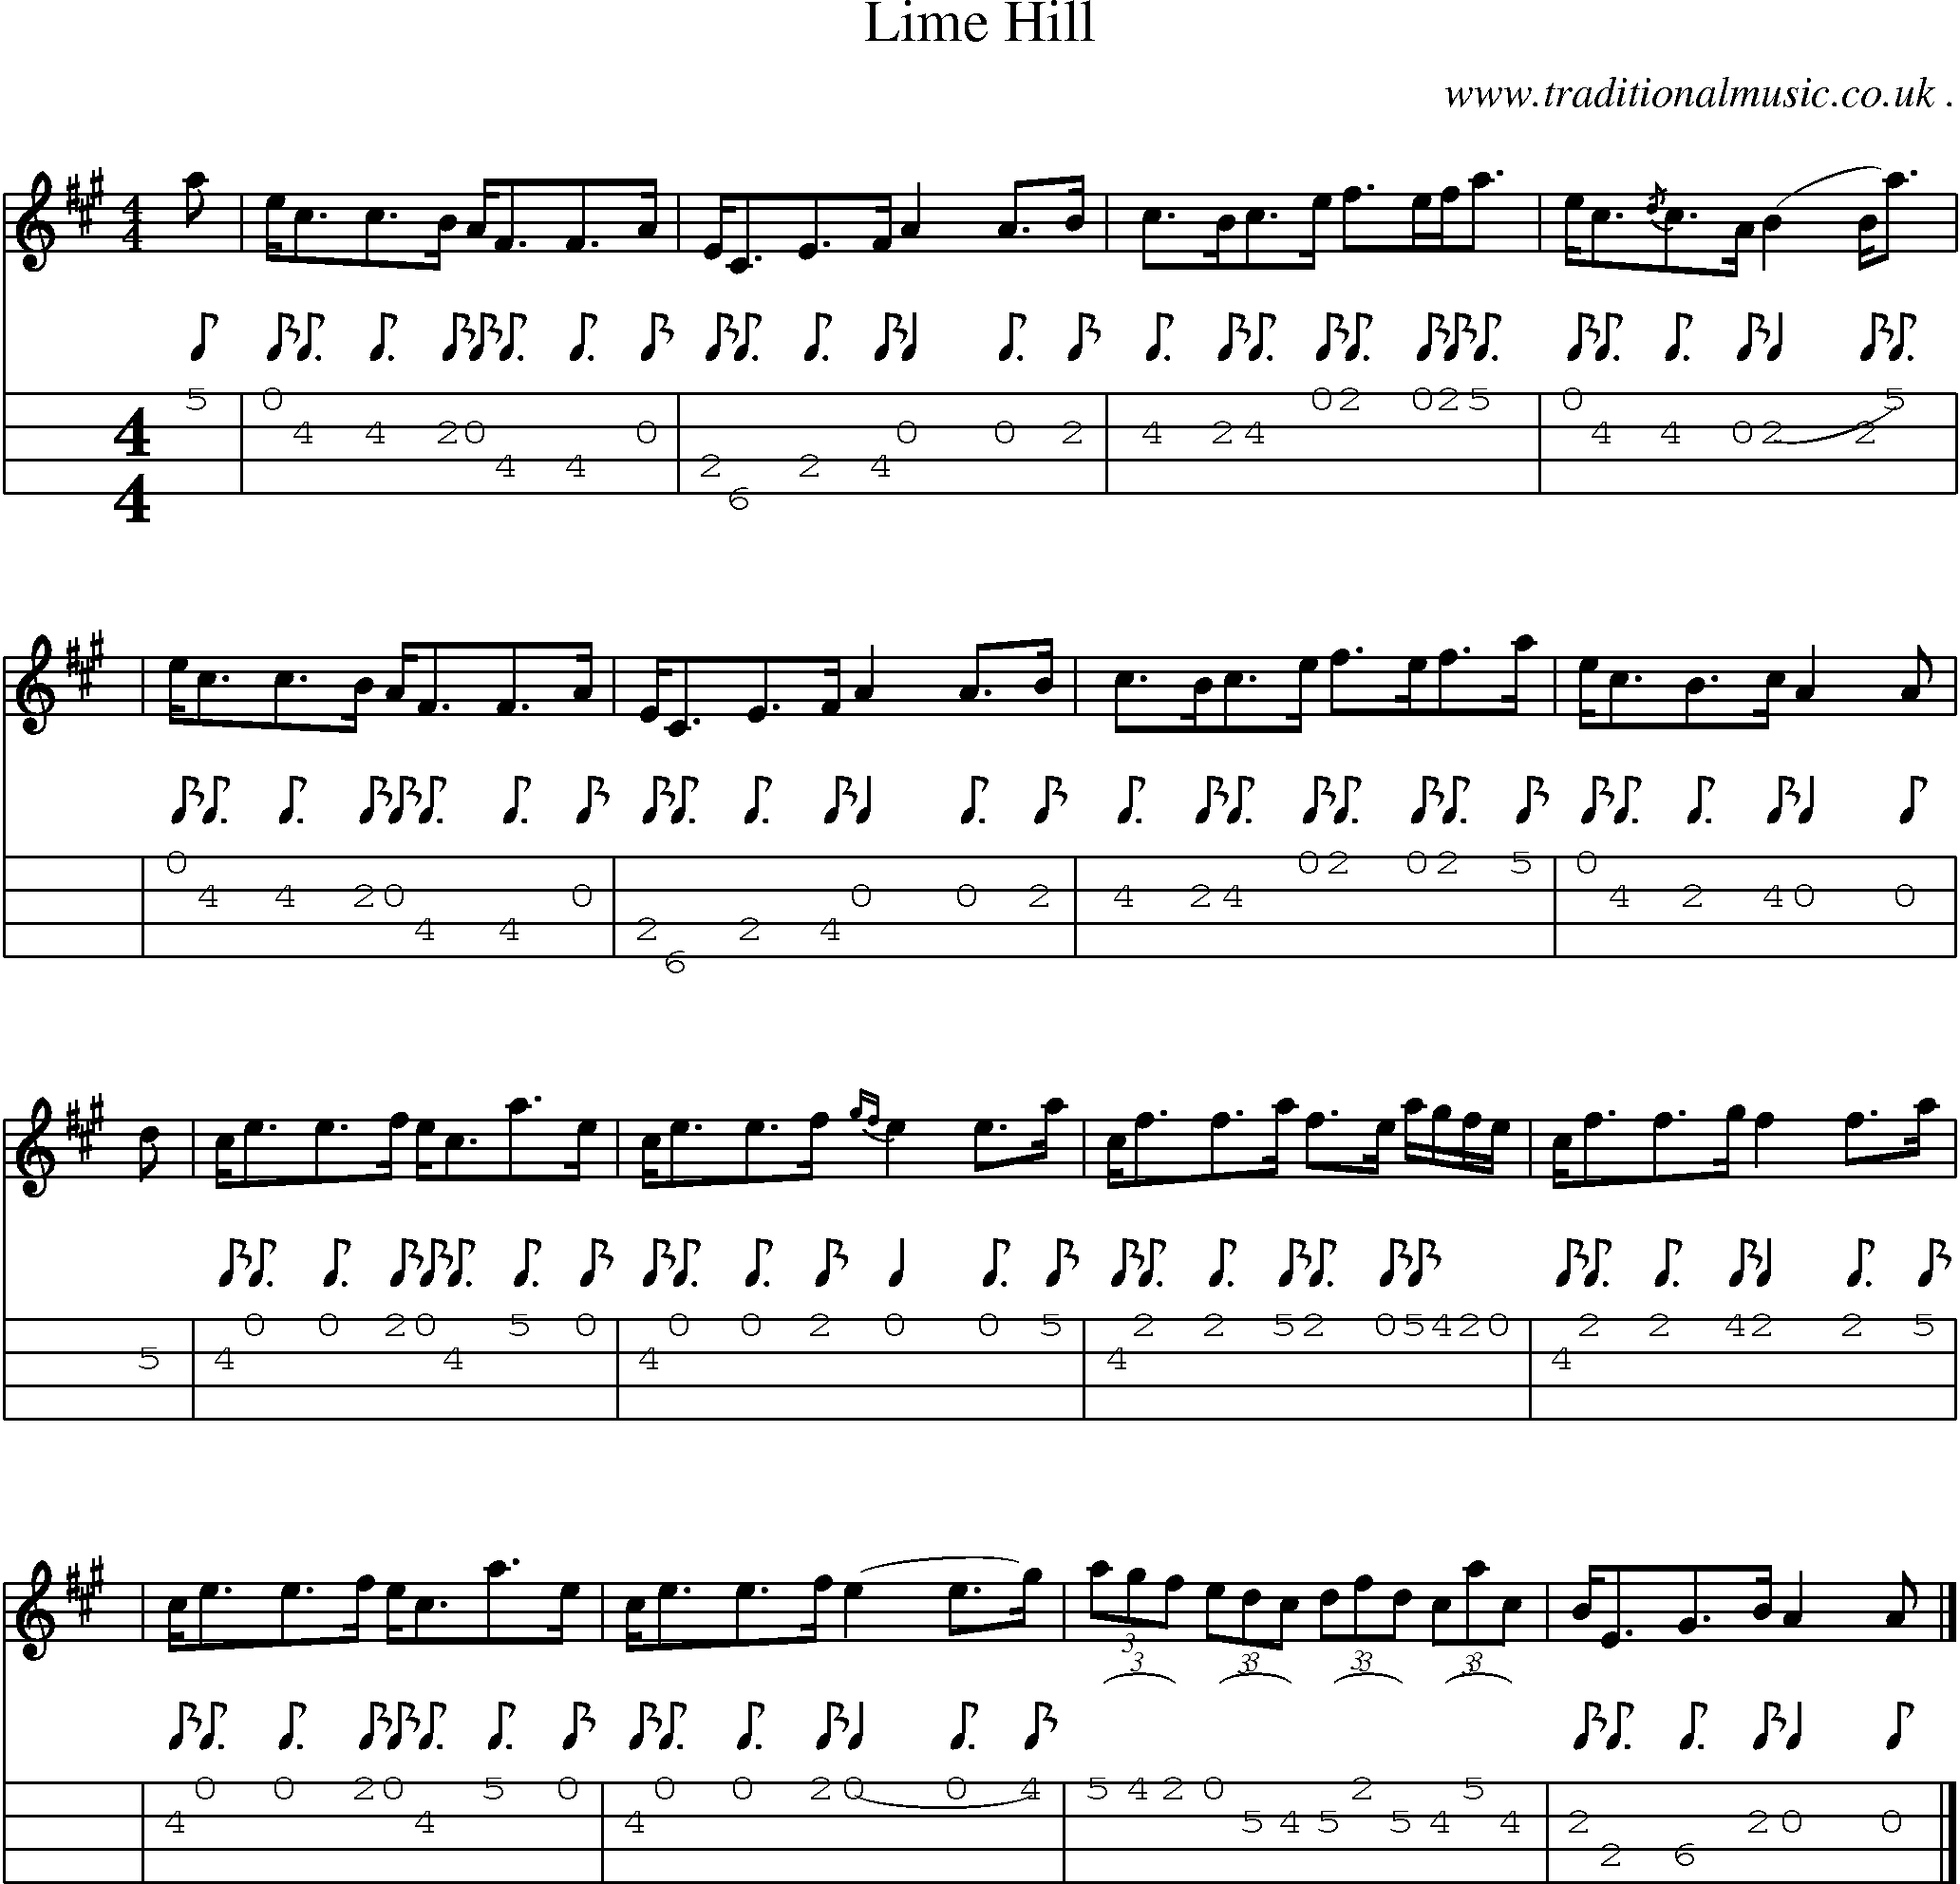 Sheet-music  score, Chords and Mandolin Tabs for Lime Hill